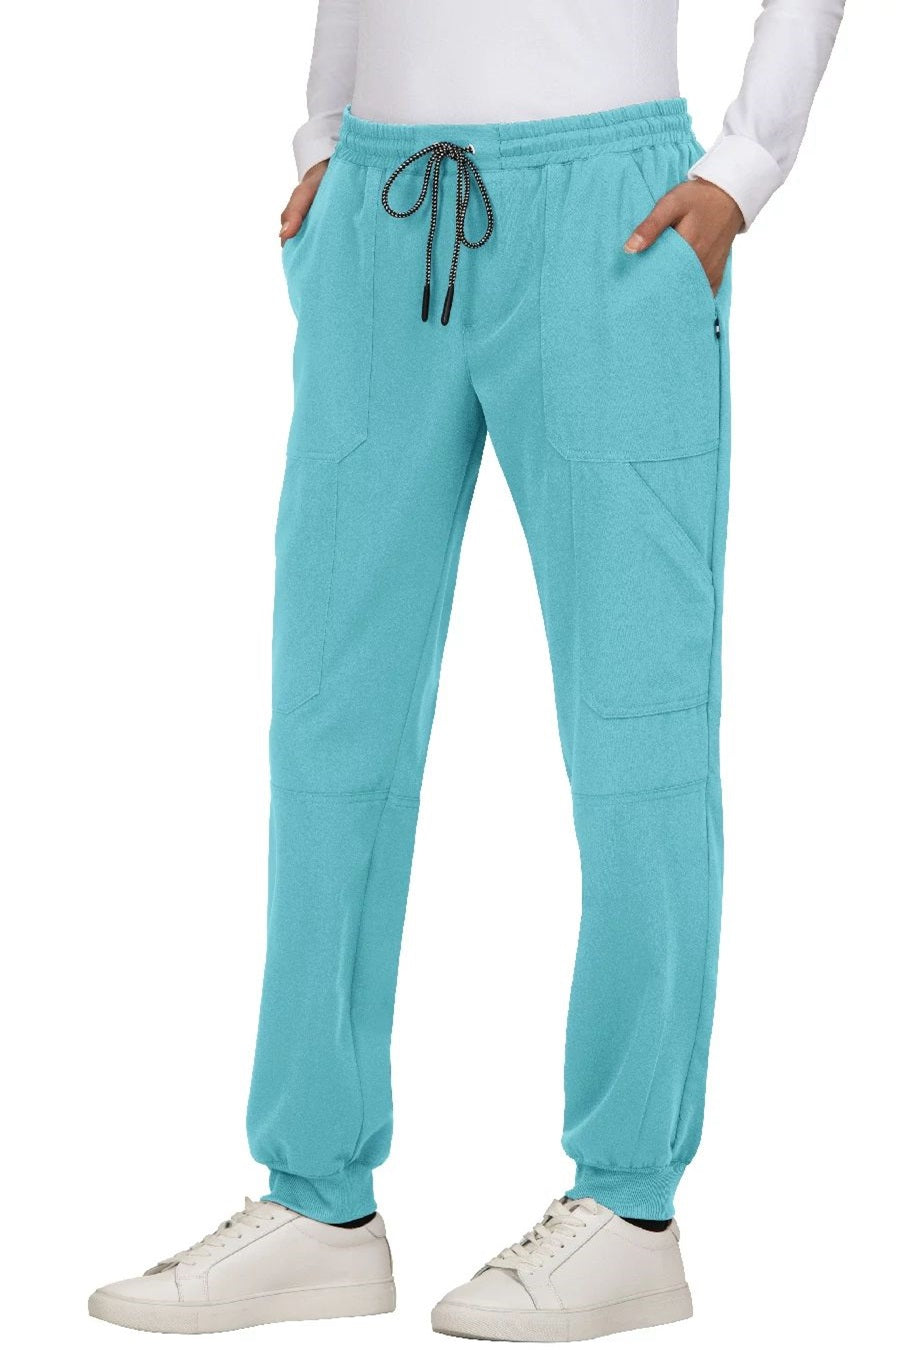 Koi Next Gen Good Vibe Jogger Pant in Sea Glass at Parker's Clothing & Shoes.